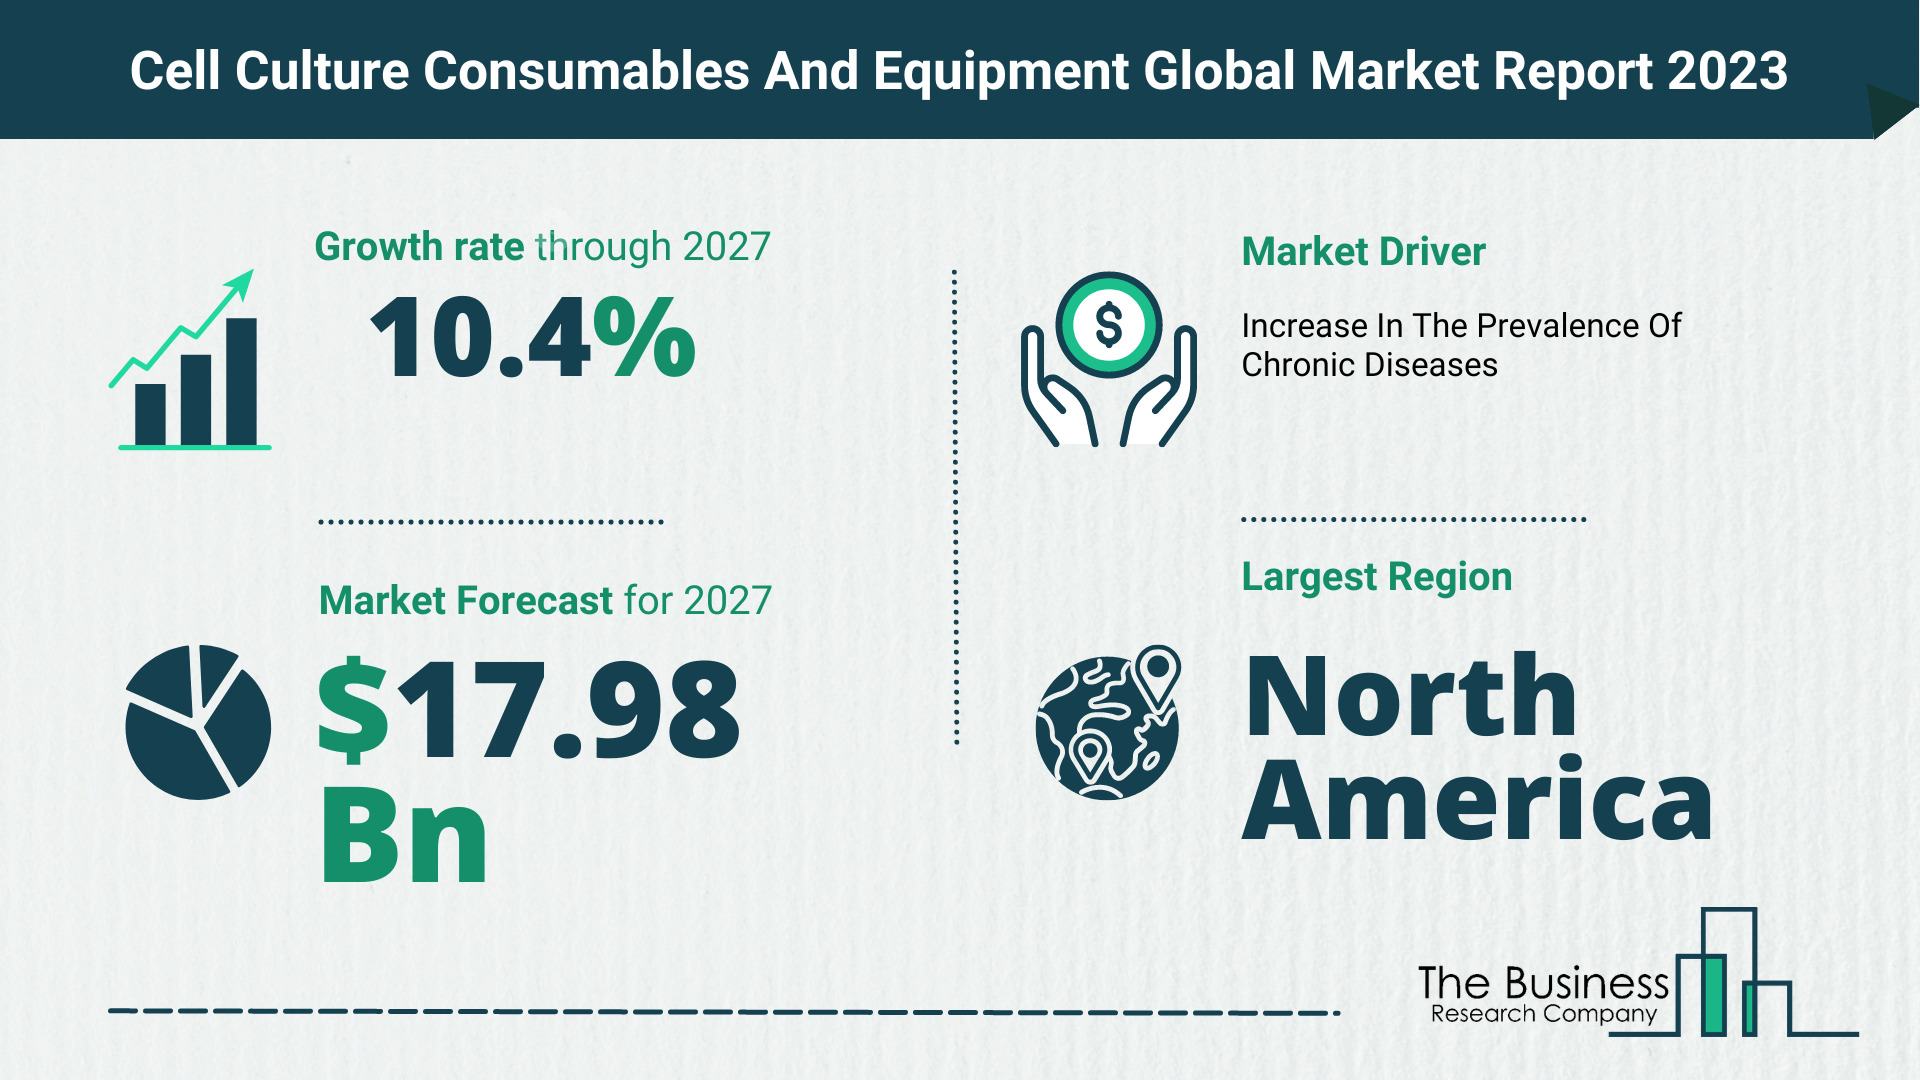 Global Cell Culture Consumables And Equipment Market